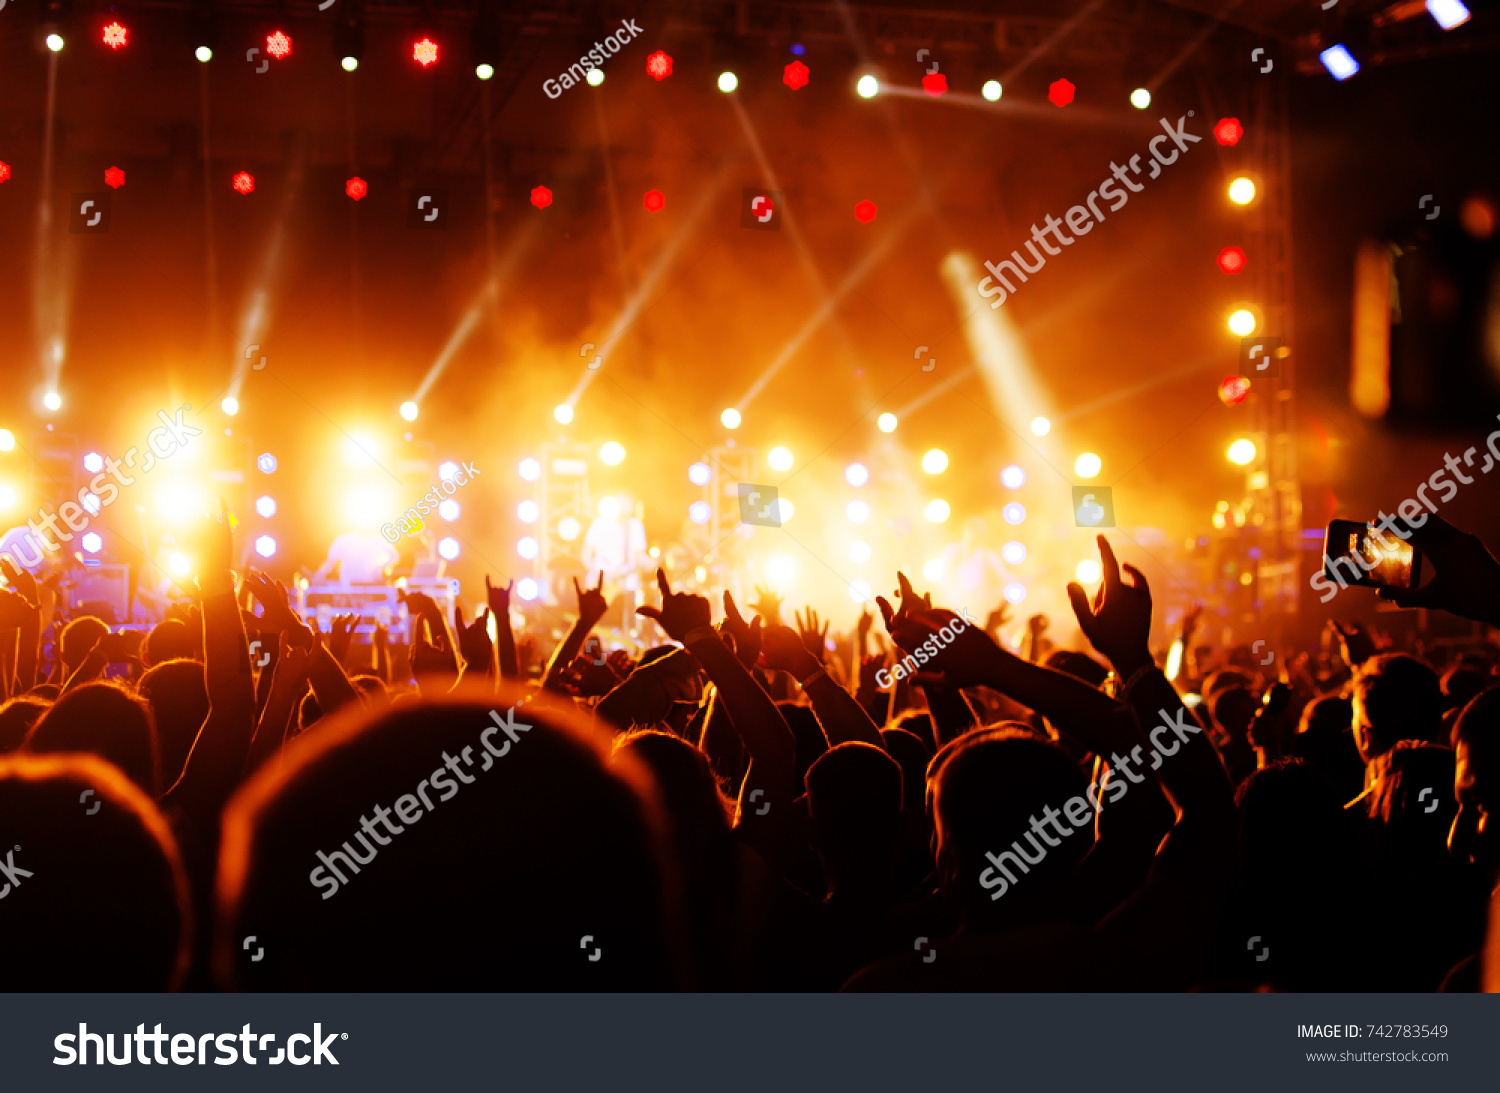 silhouettes of concert crowd and mohawk punk hair style in front of bright stage lights #742783549